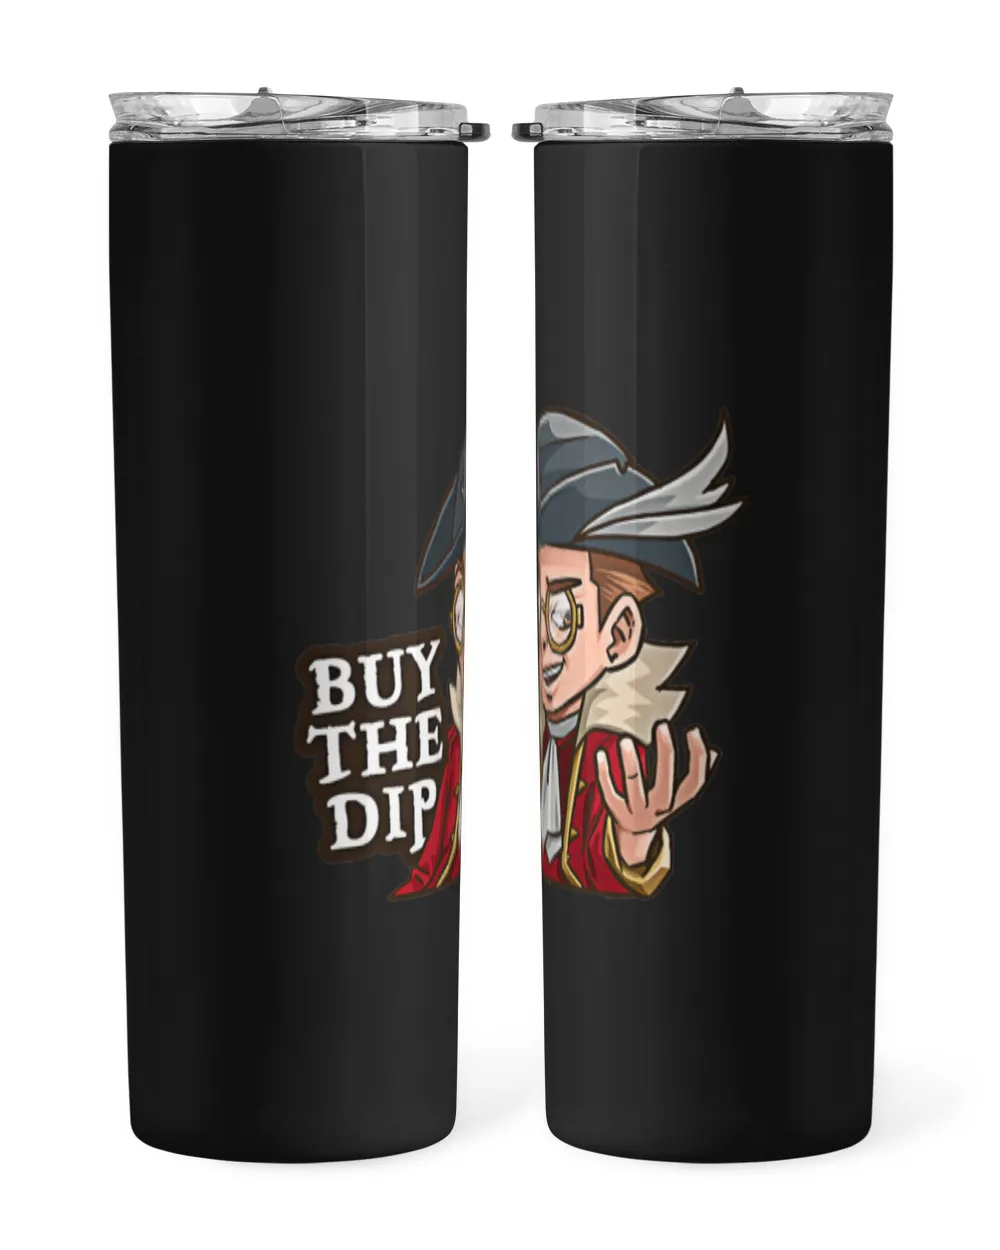 Buy the dip,  crypto cup,,